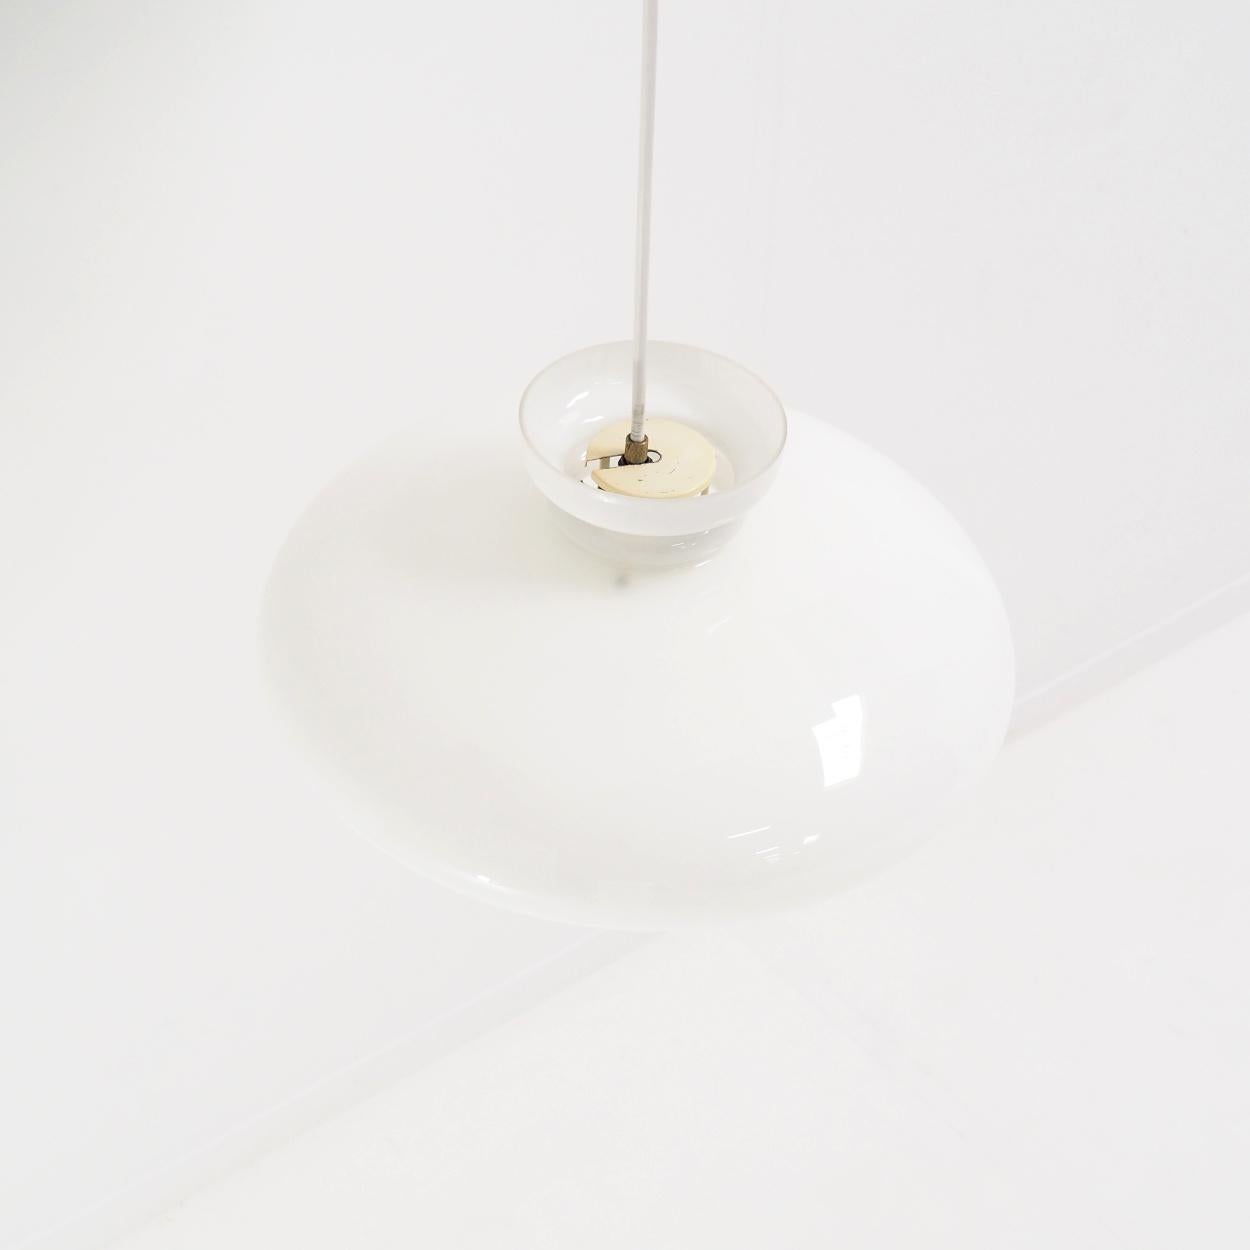 1960s pendant B-1008, or ‘The Bowl’, by Raak Amsterdam.

This lamp first appears in the Raak catalog from 1968. The 1972 catalog then states that these lamps were inspired by a rummer and decanter. Attributes that can be used when drinking wine. The